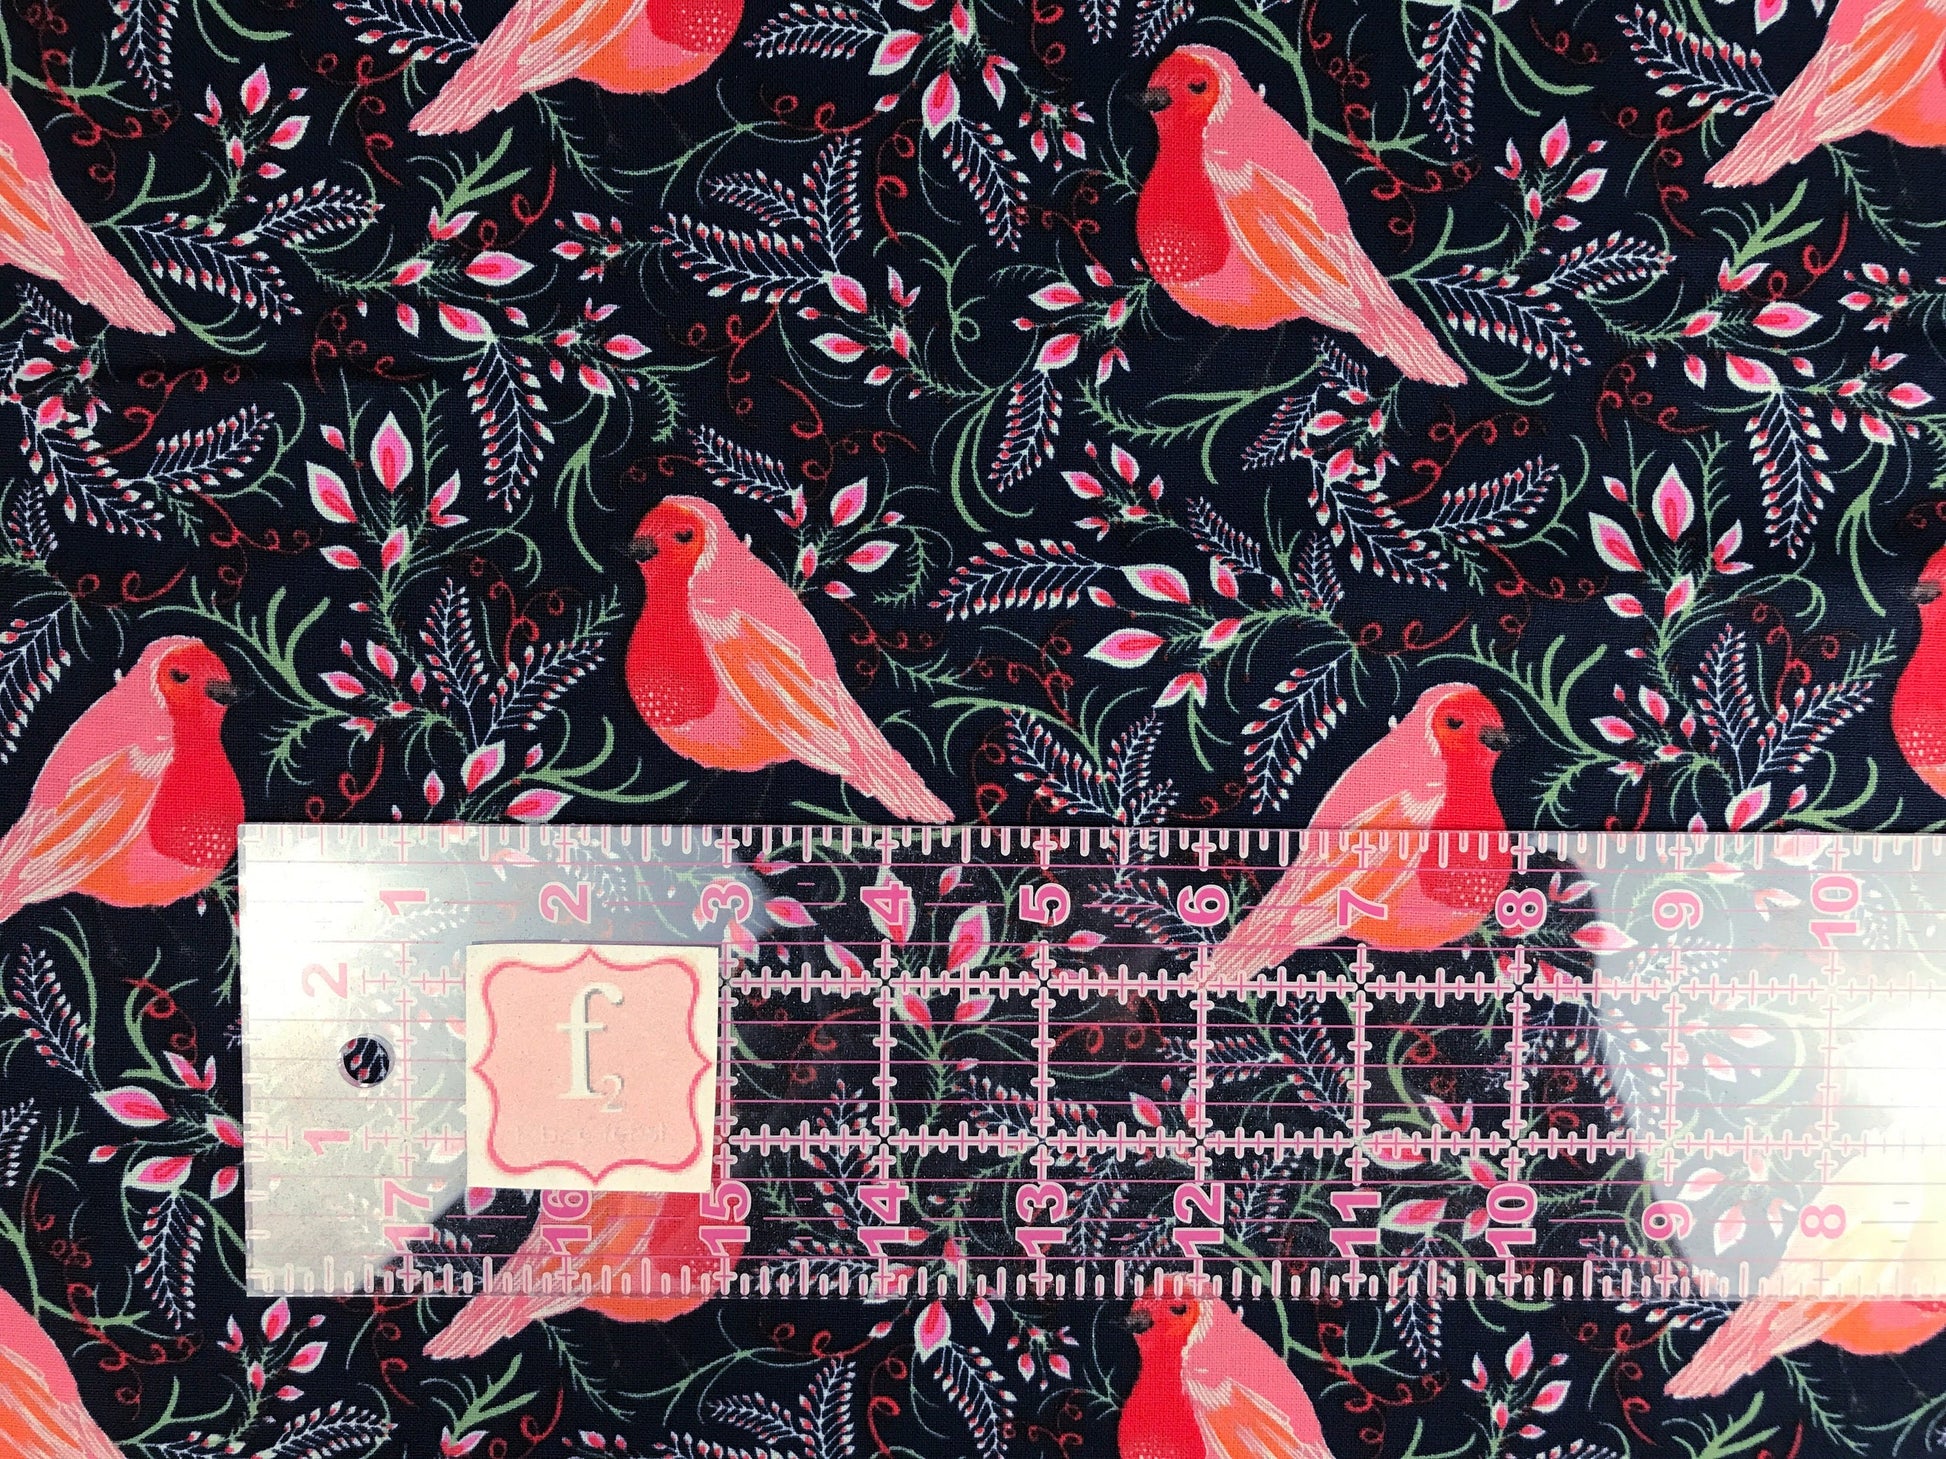 Red Robin Jolly Robins Beth Salt The Craft Cotton Co Quilters Cotton Fabric Fetish